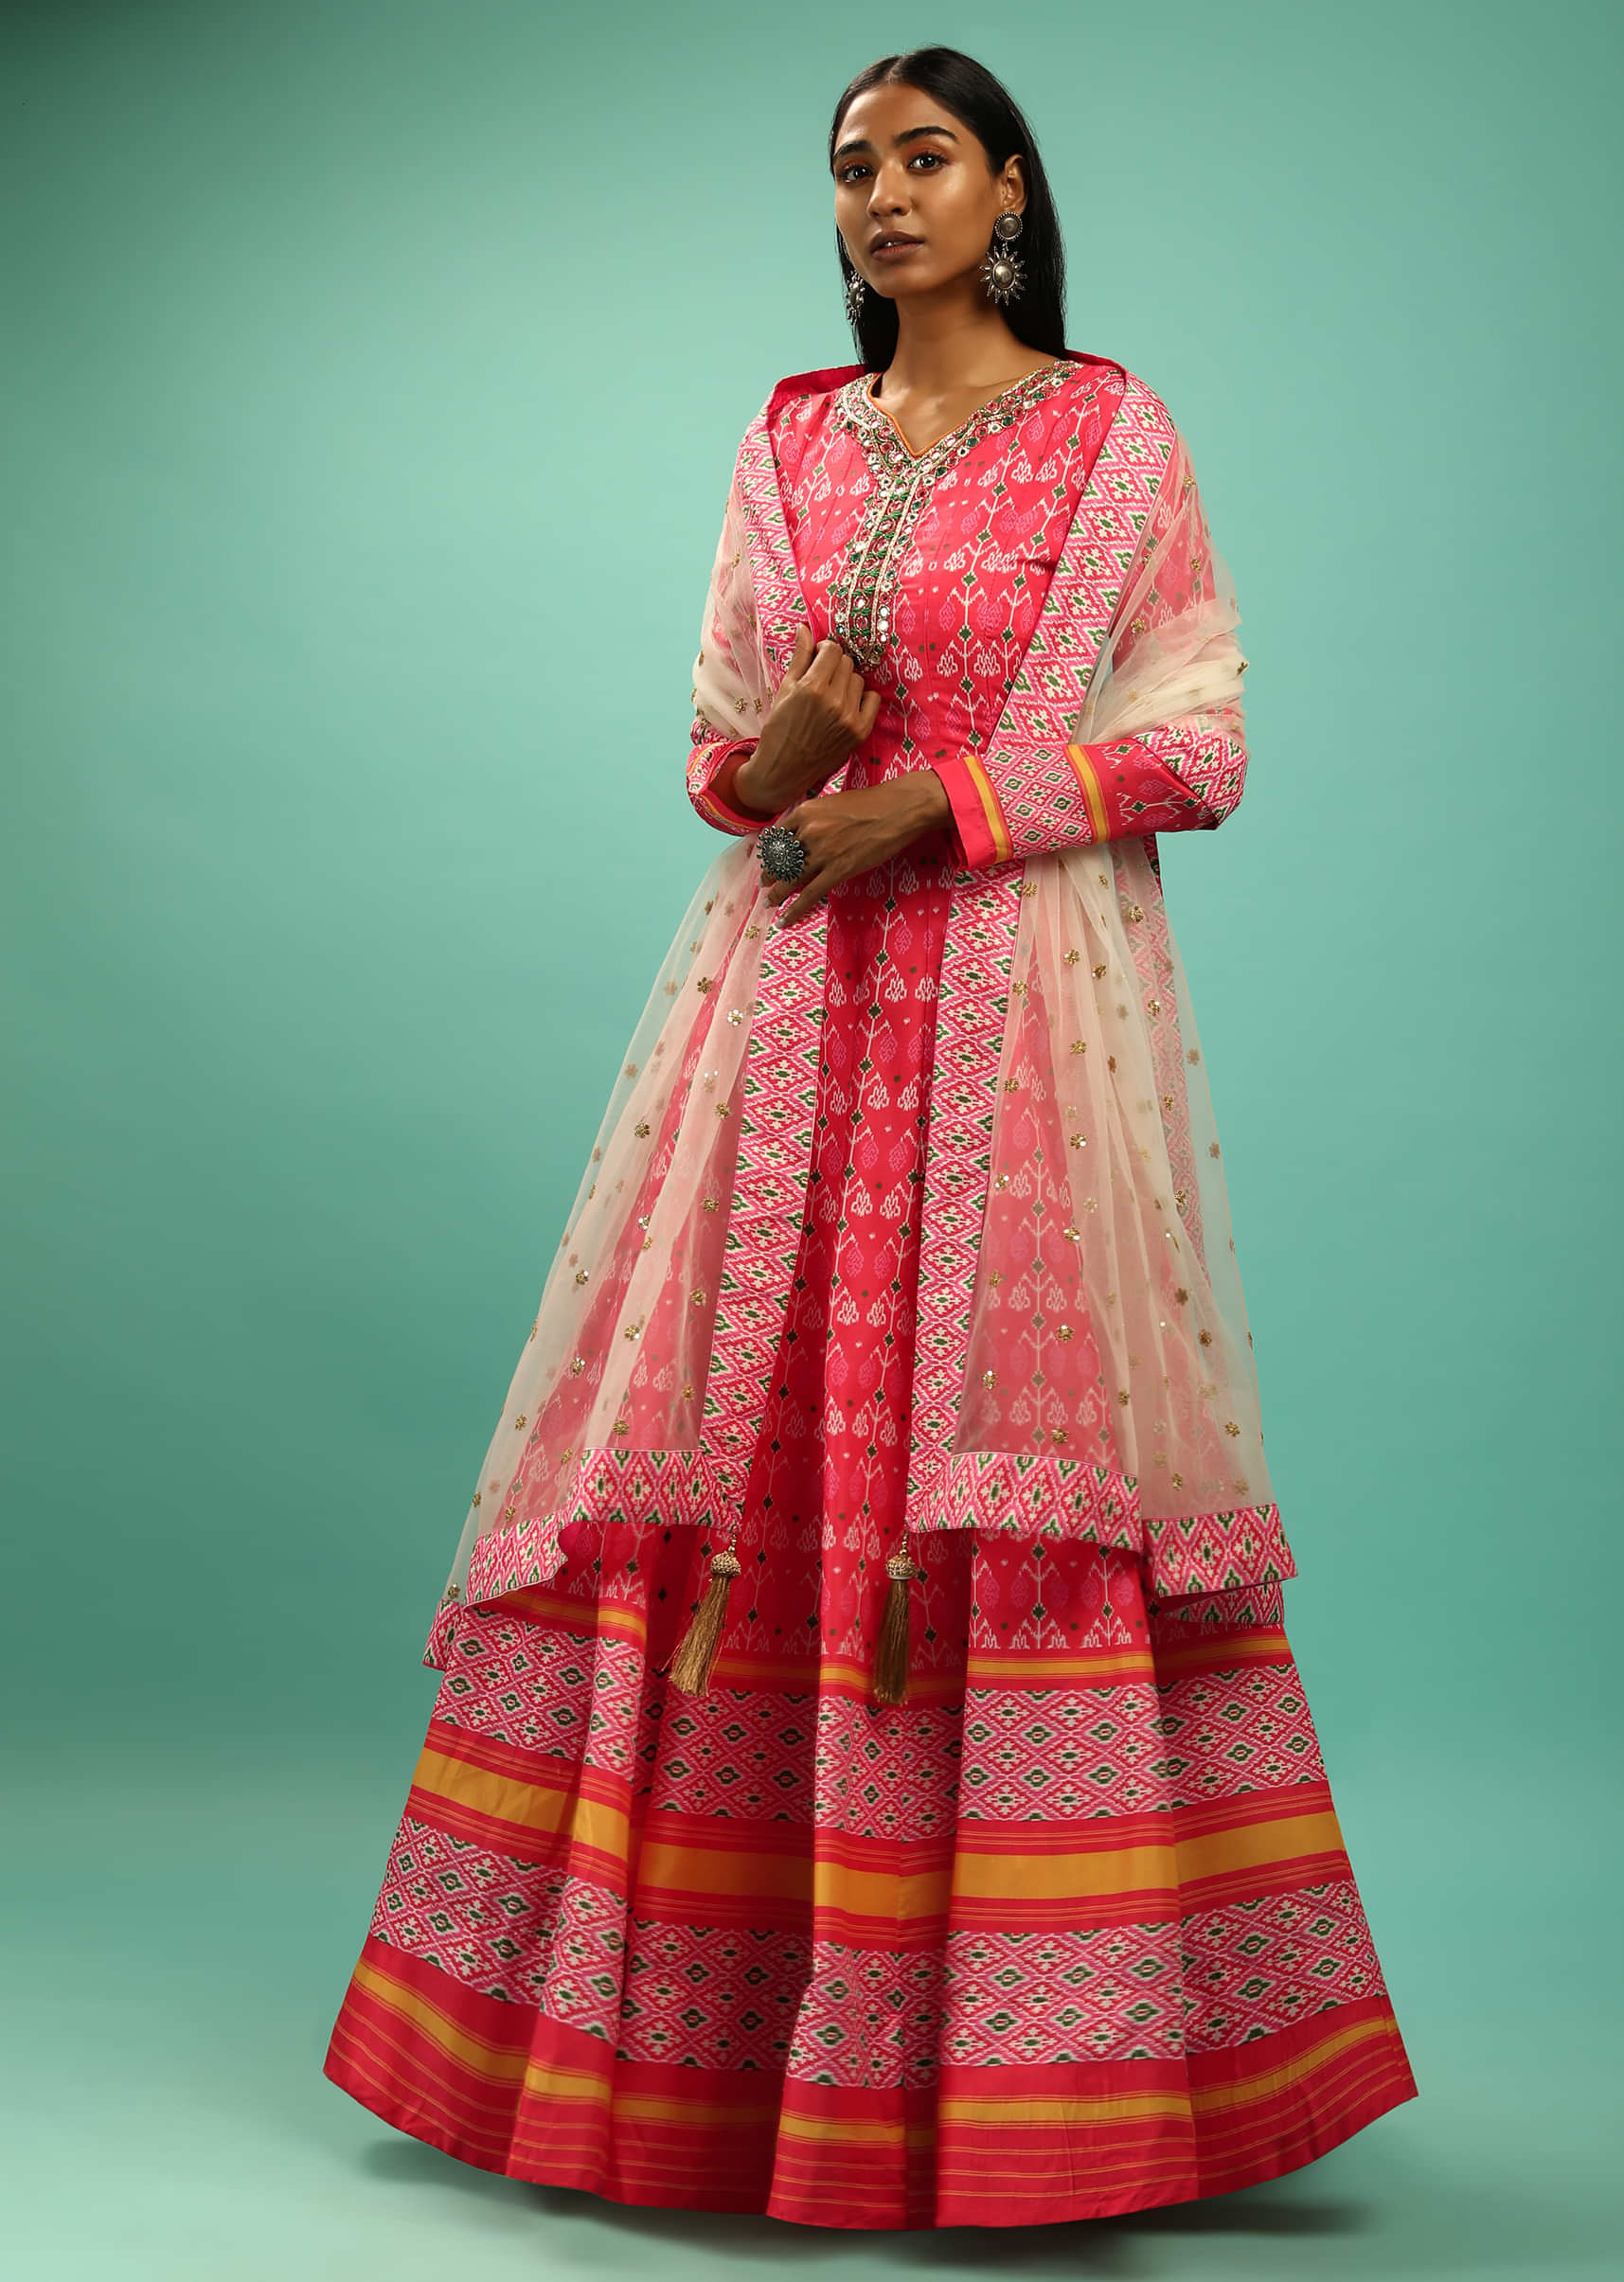 Fuchsia Pink Anarkali Suit With Multi Colored Patola Print And Mirror Embroidery  